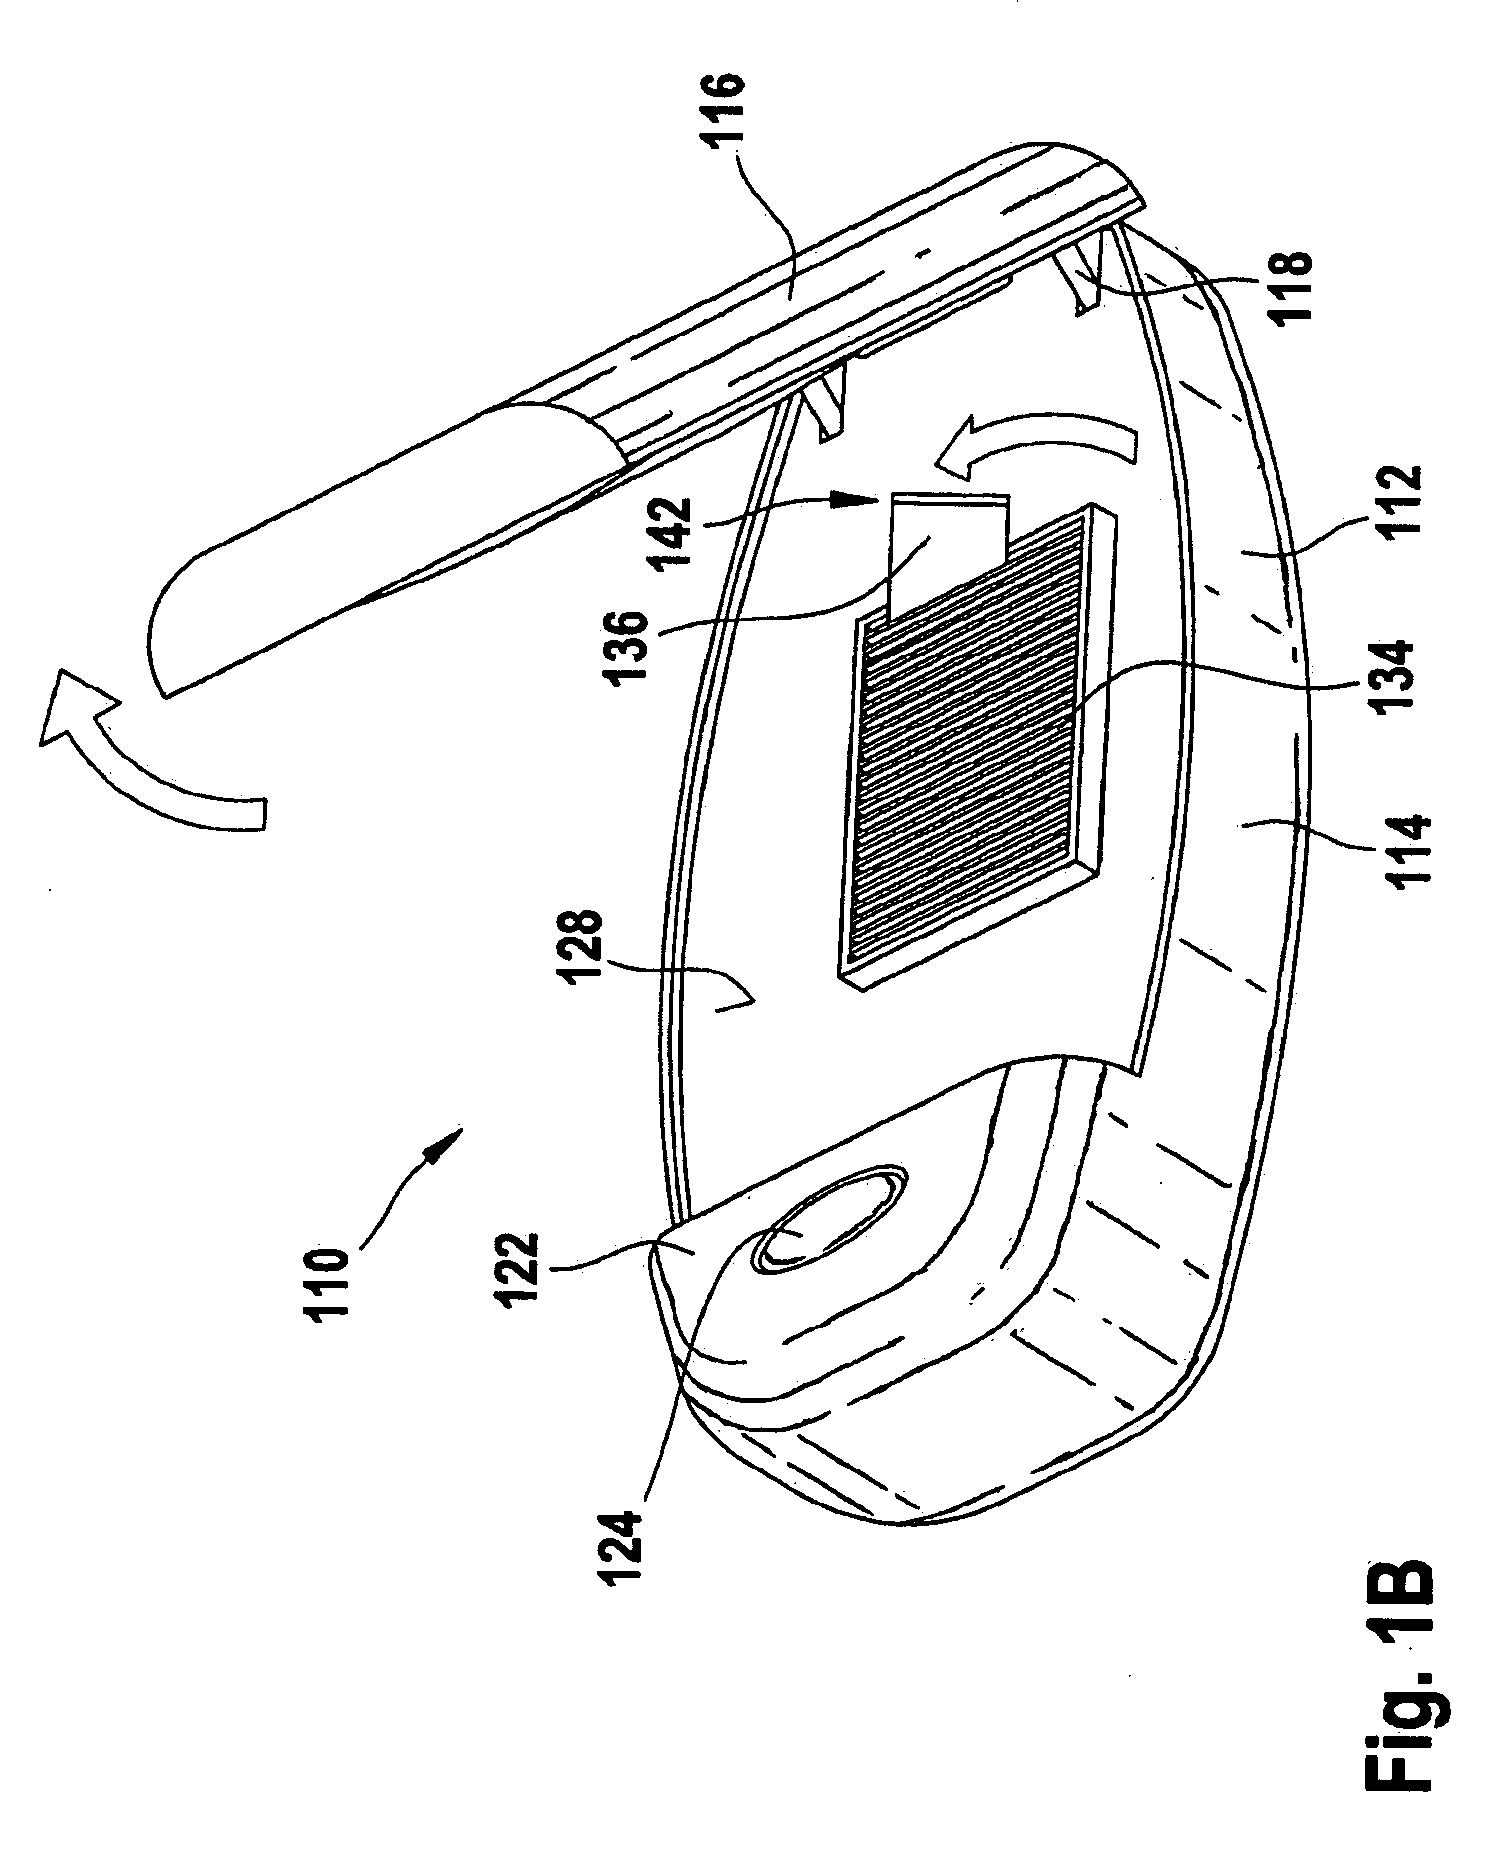 Test device for determining an analyte concentration